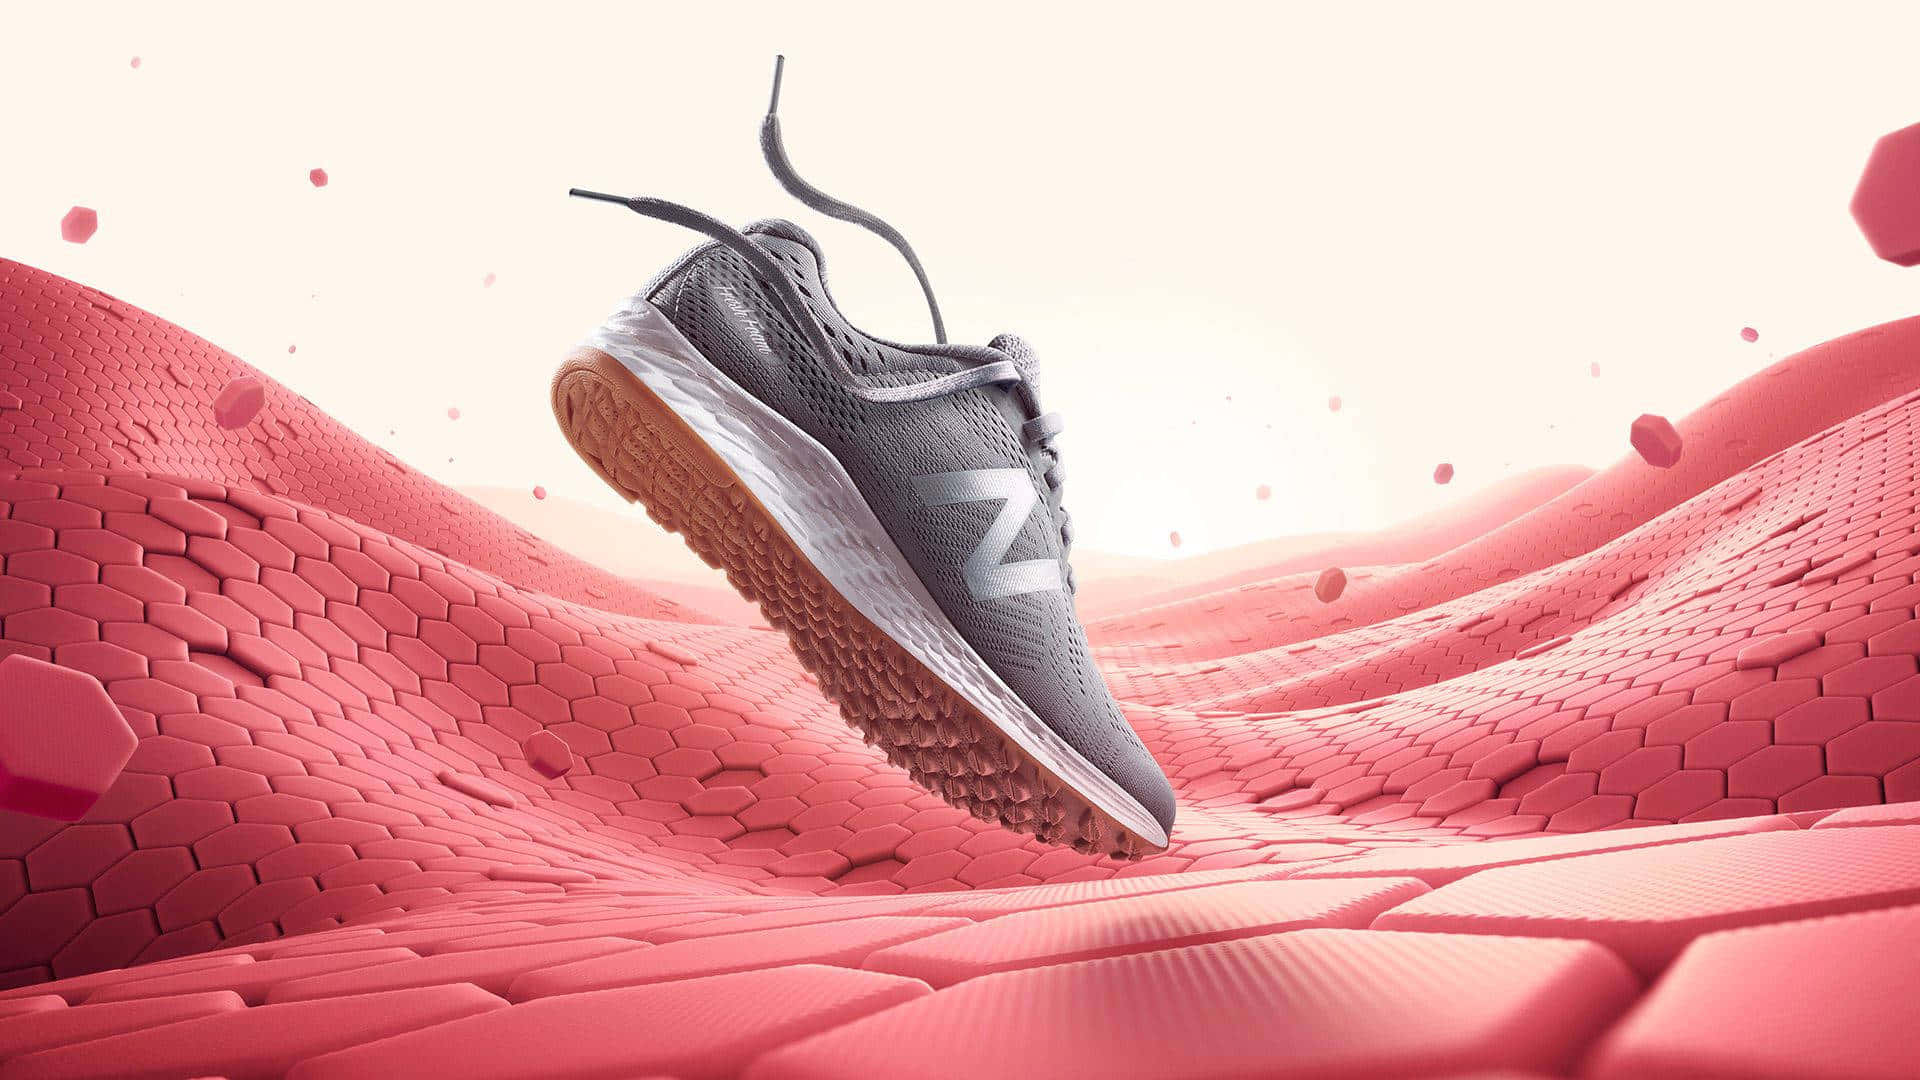 "Look Stylish and Feel Comfortable with New Balance!"